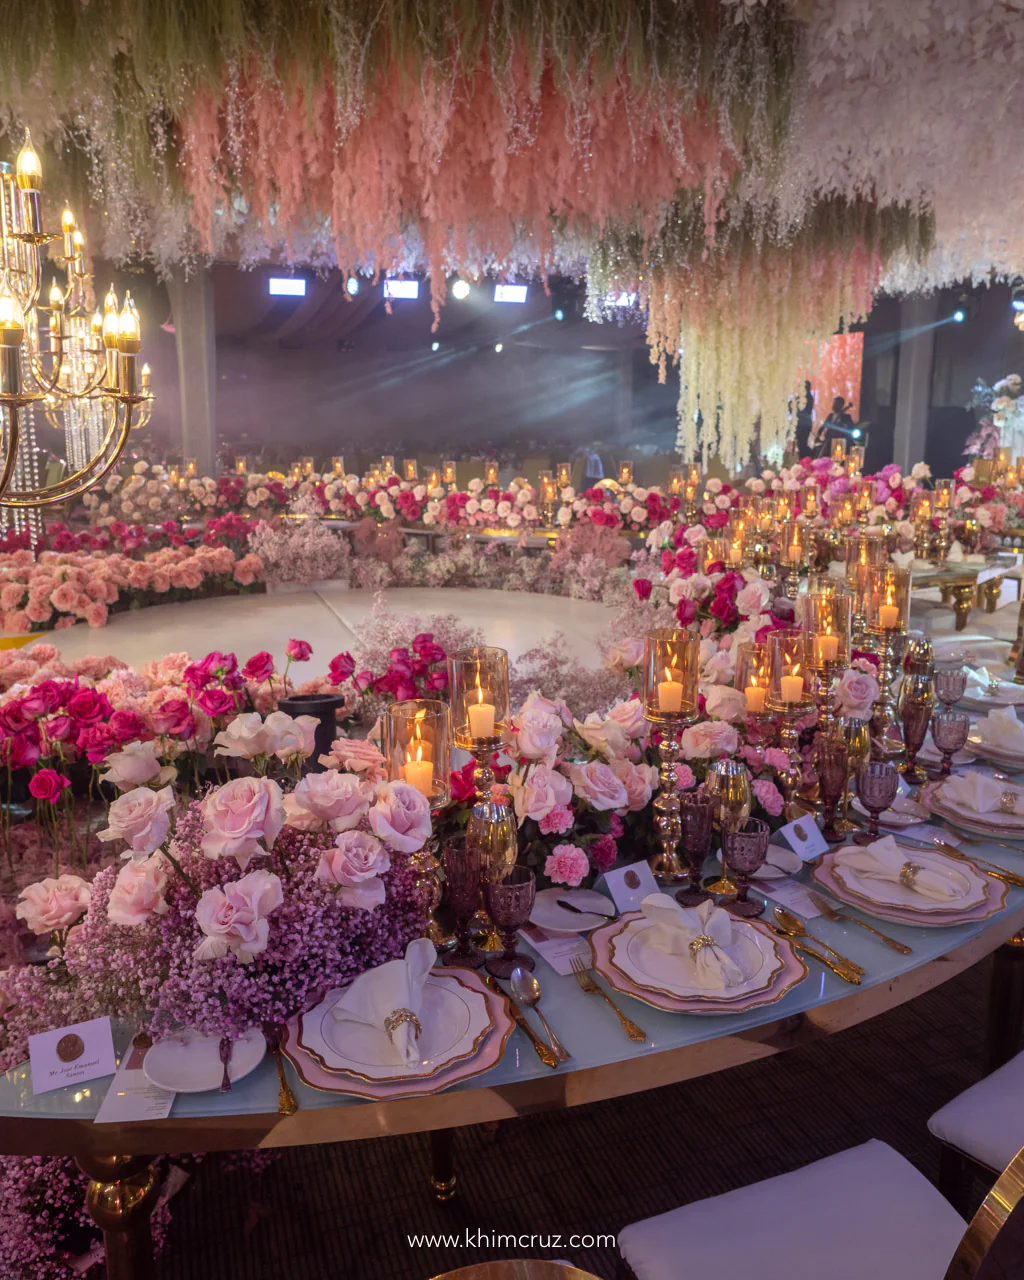 dreamy pink hues floral table centerpieces detail arranged on a circular table for the wedding reception of Ralph & Mary by floral designer Khim Cruz